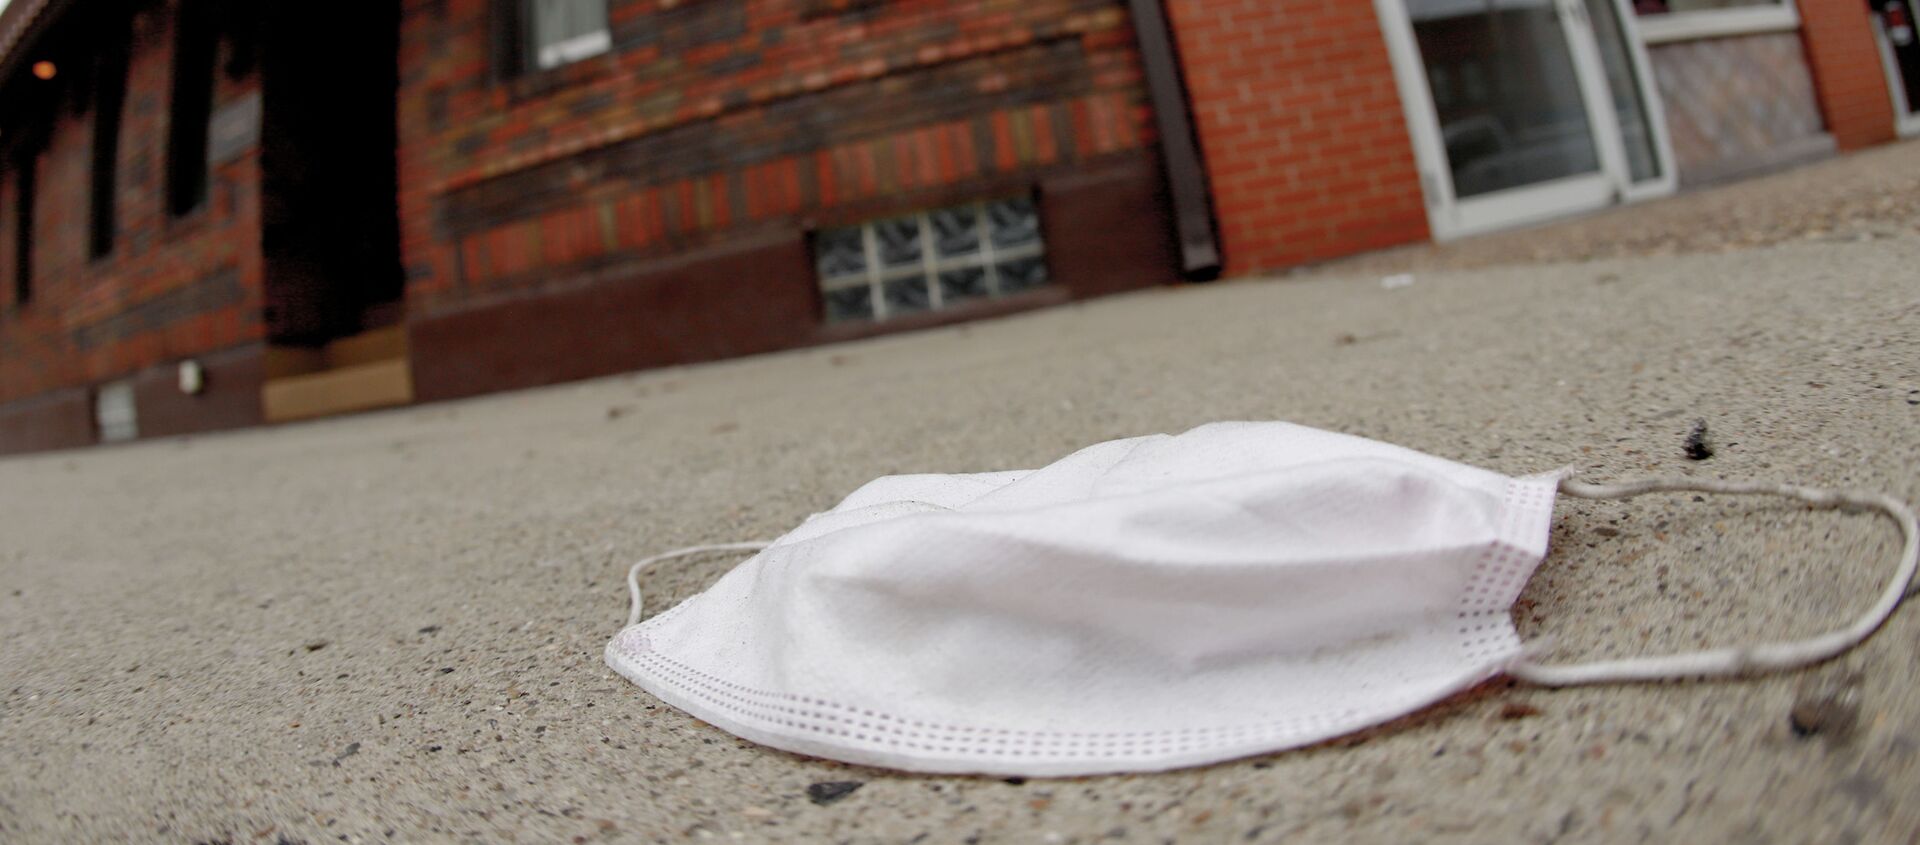 A discarded protective mask lays on the sidewalk along East Carson Street in the Southside neighborhood of Pittsburgh, Thursday, Jan. 7, 2021. - Sputnik International, 1920